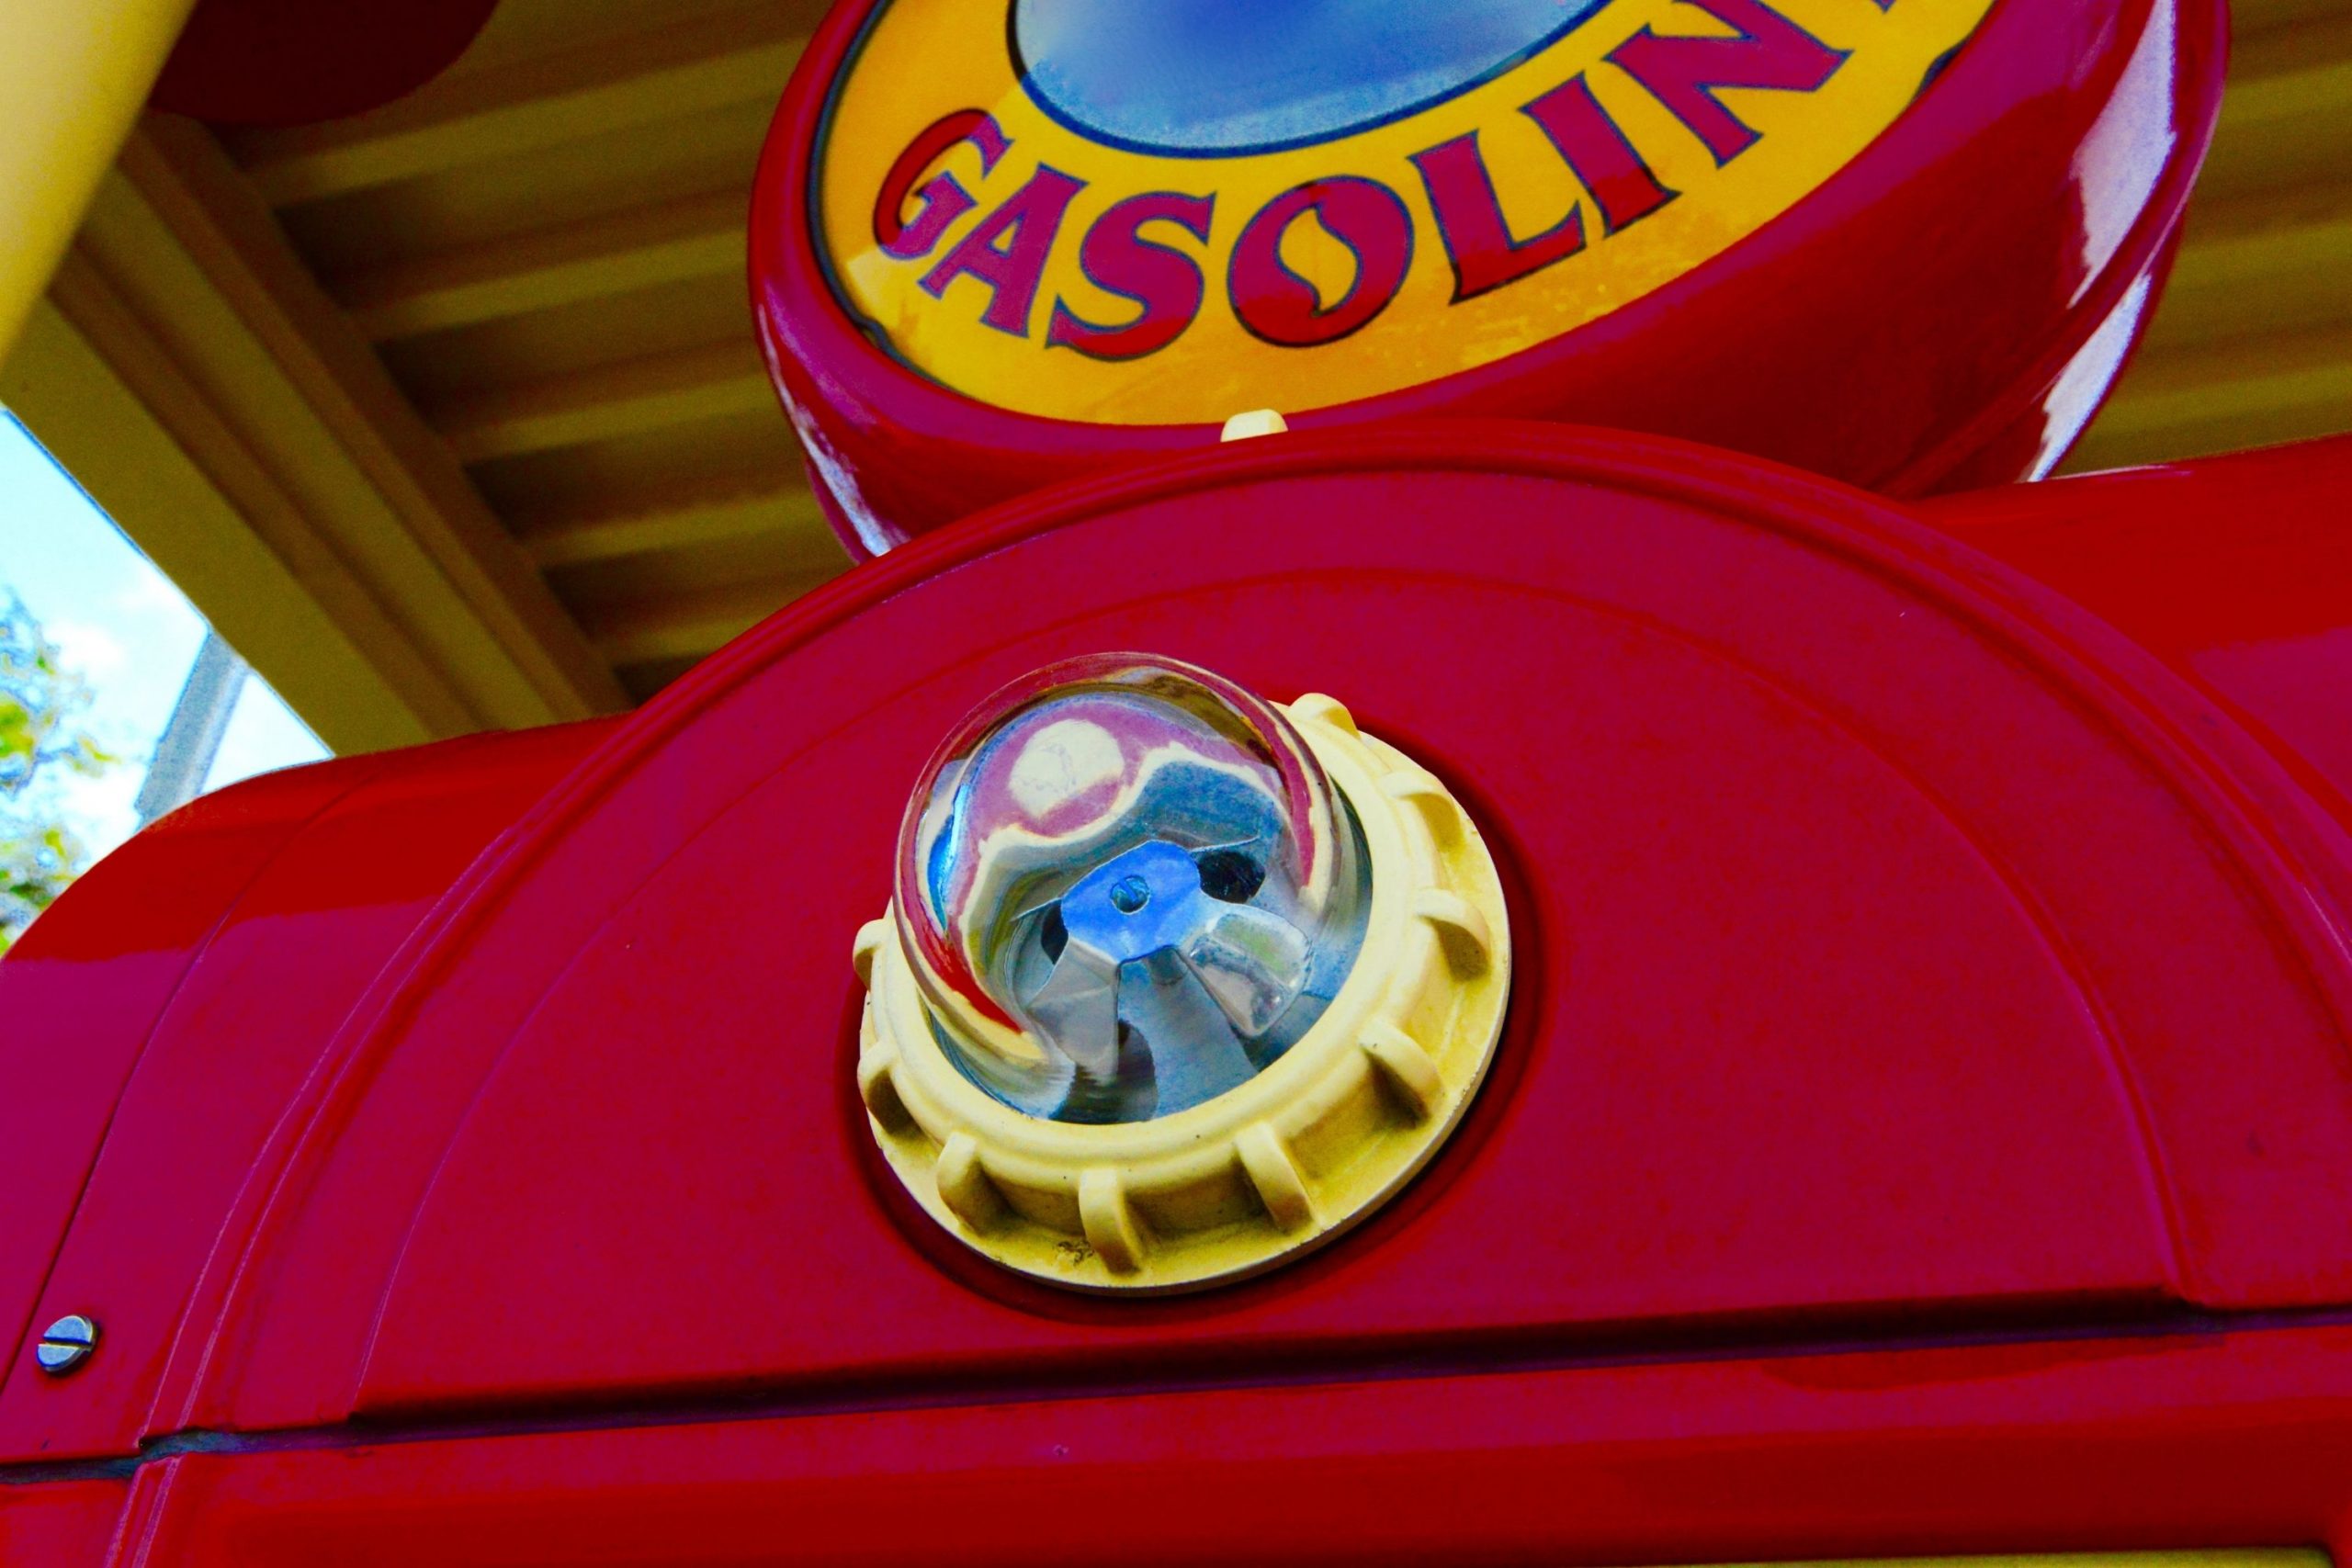 Extra Tips On Getting Gasoline Smell Off Hands